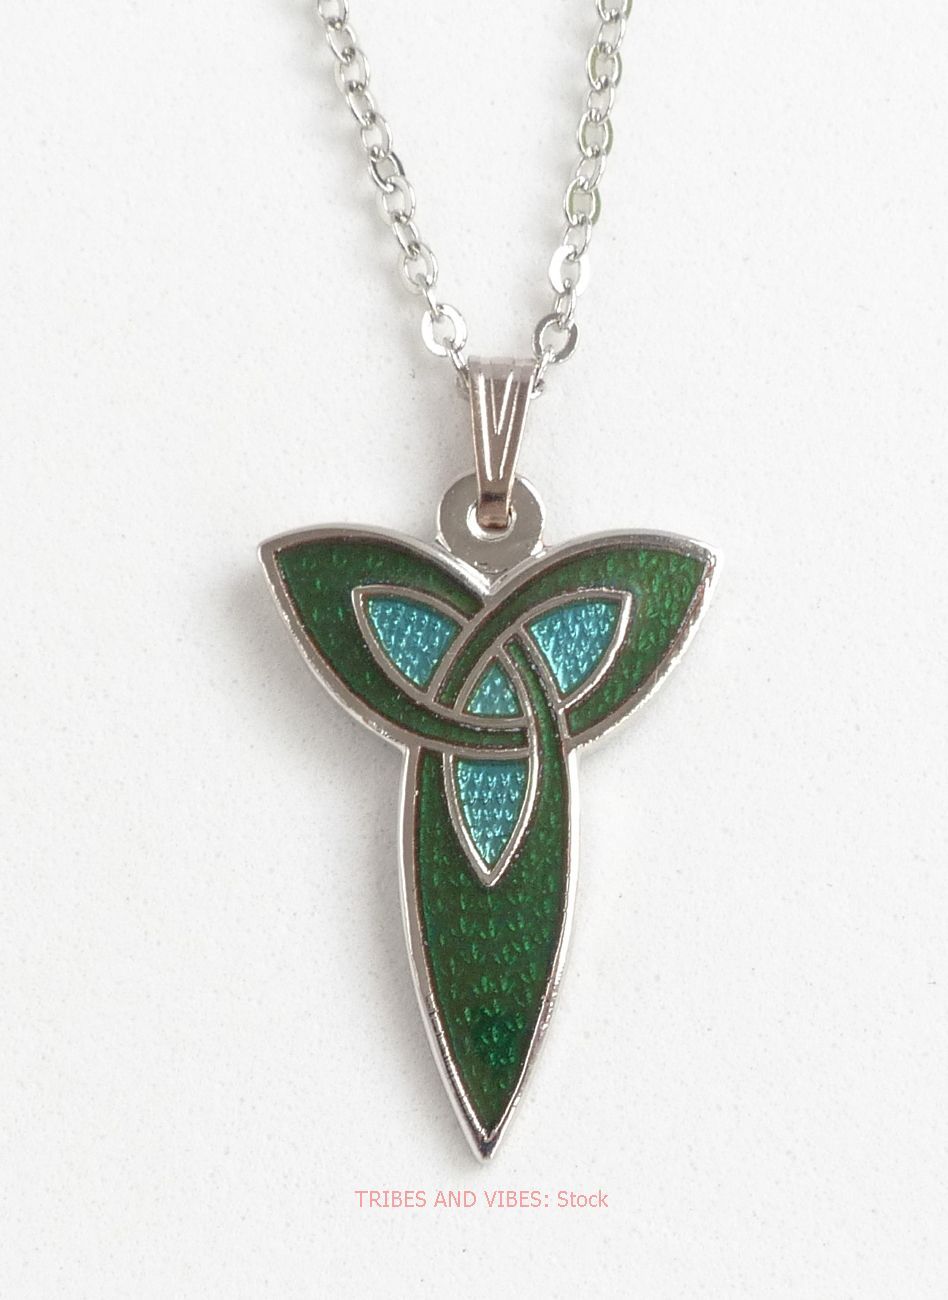 Green Aqua Triquetra Trinity Knot Pendant Silver Plate Necklace by Sea Gems